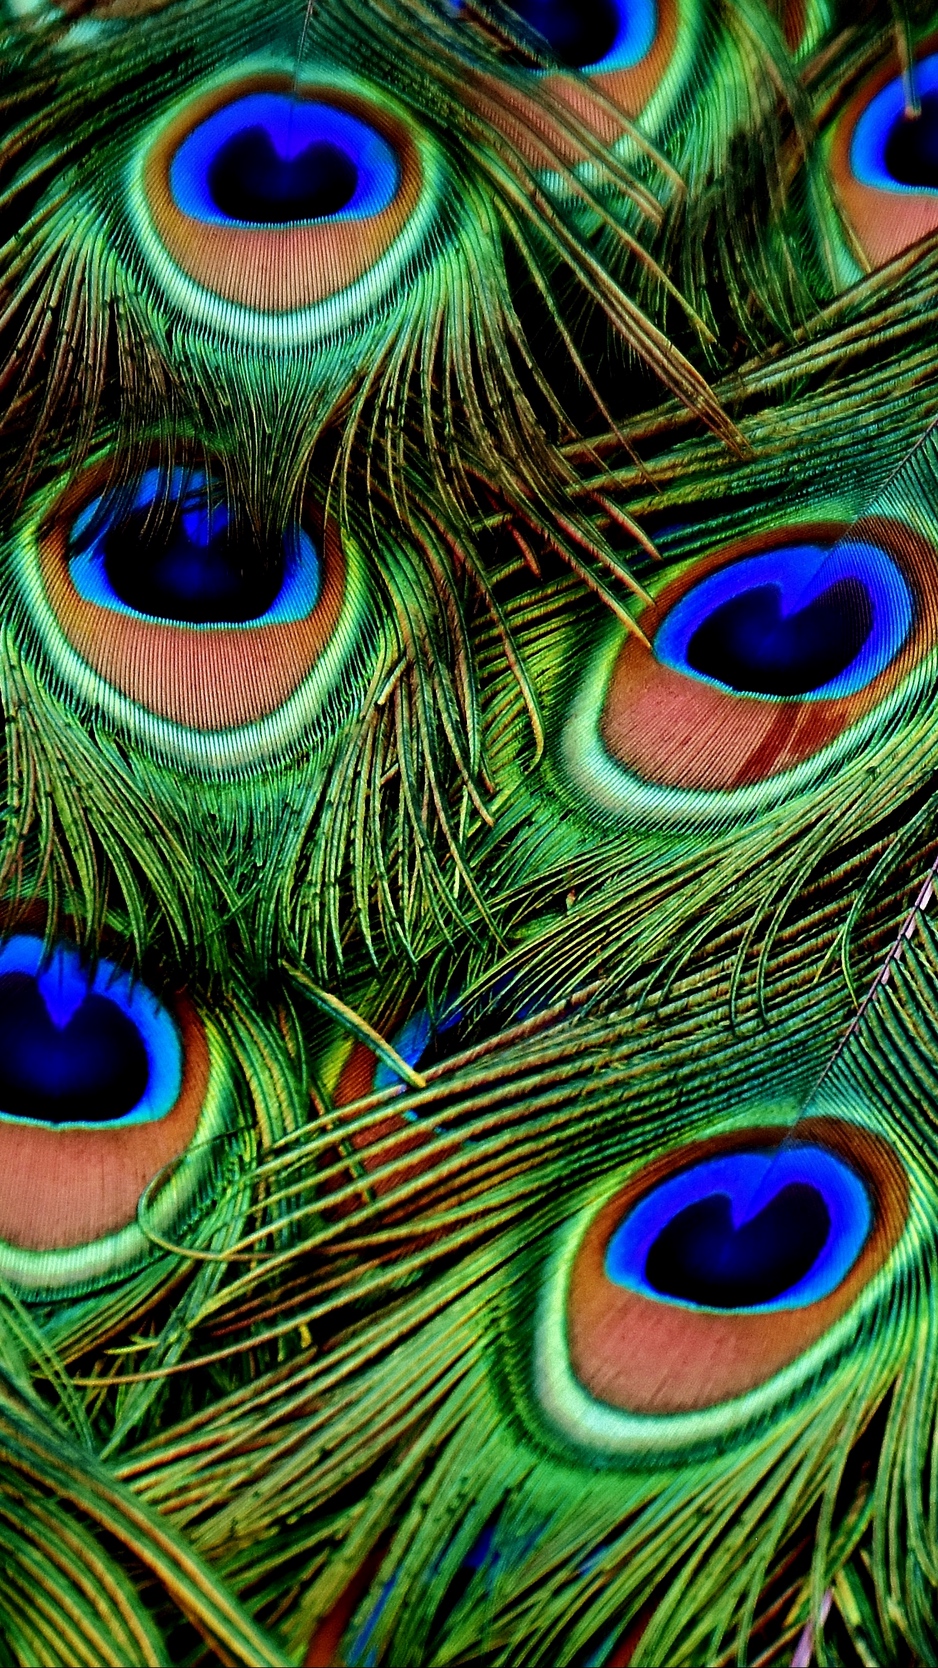 Free download Download wallpaper 938x1668 peacocks feathers patterns iphone 8 [938x1668] for your Desktop, Mobile & Tablet. Explore Feathers iPhone Wallpaper. Feathers iPhone Wallpaper, Peacock Feathers Wallpaper, Bing Wallpaper Feathers